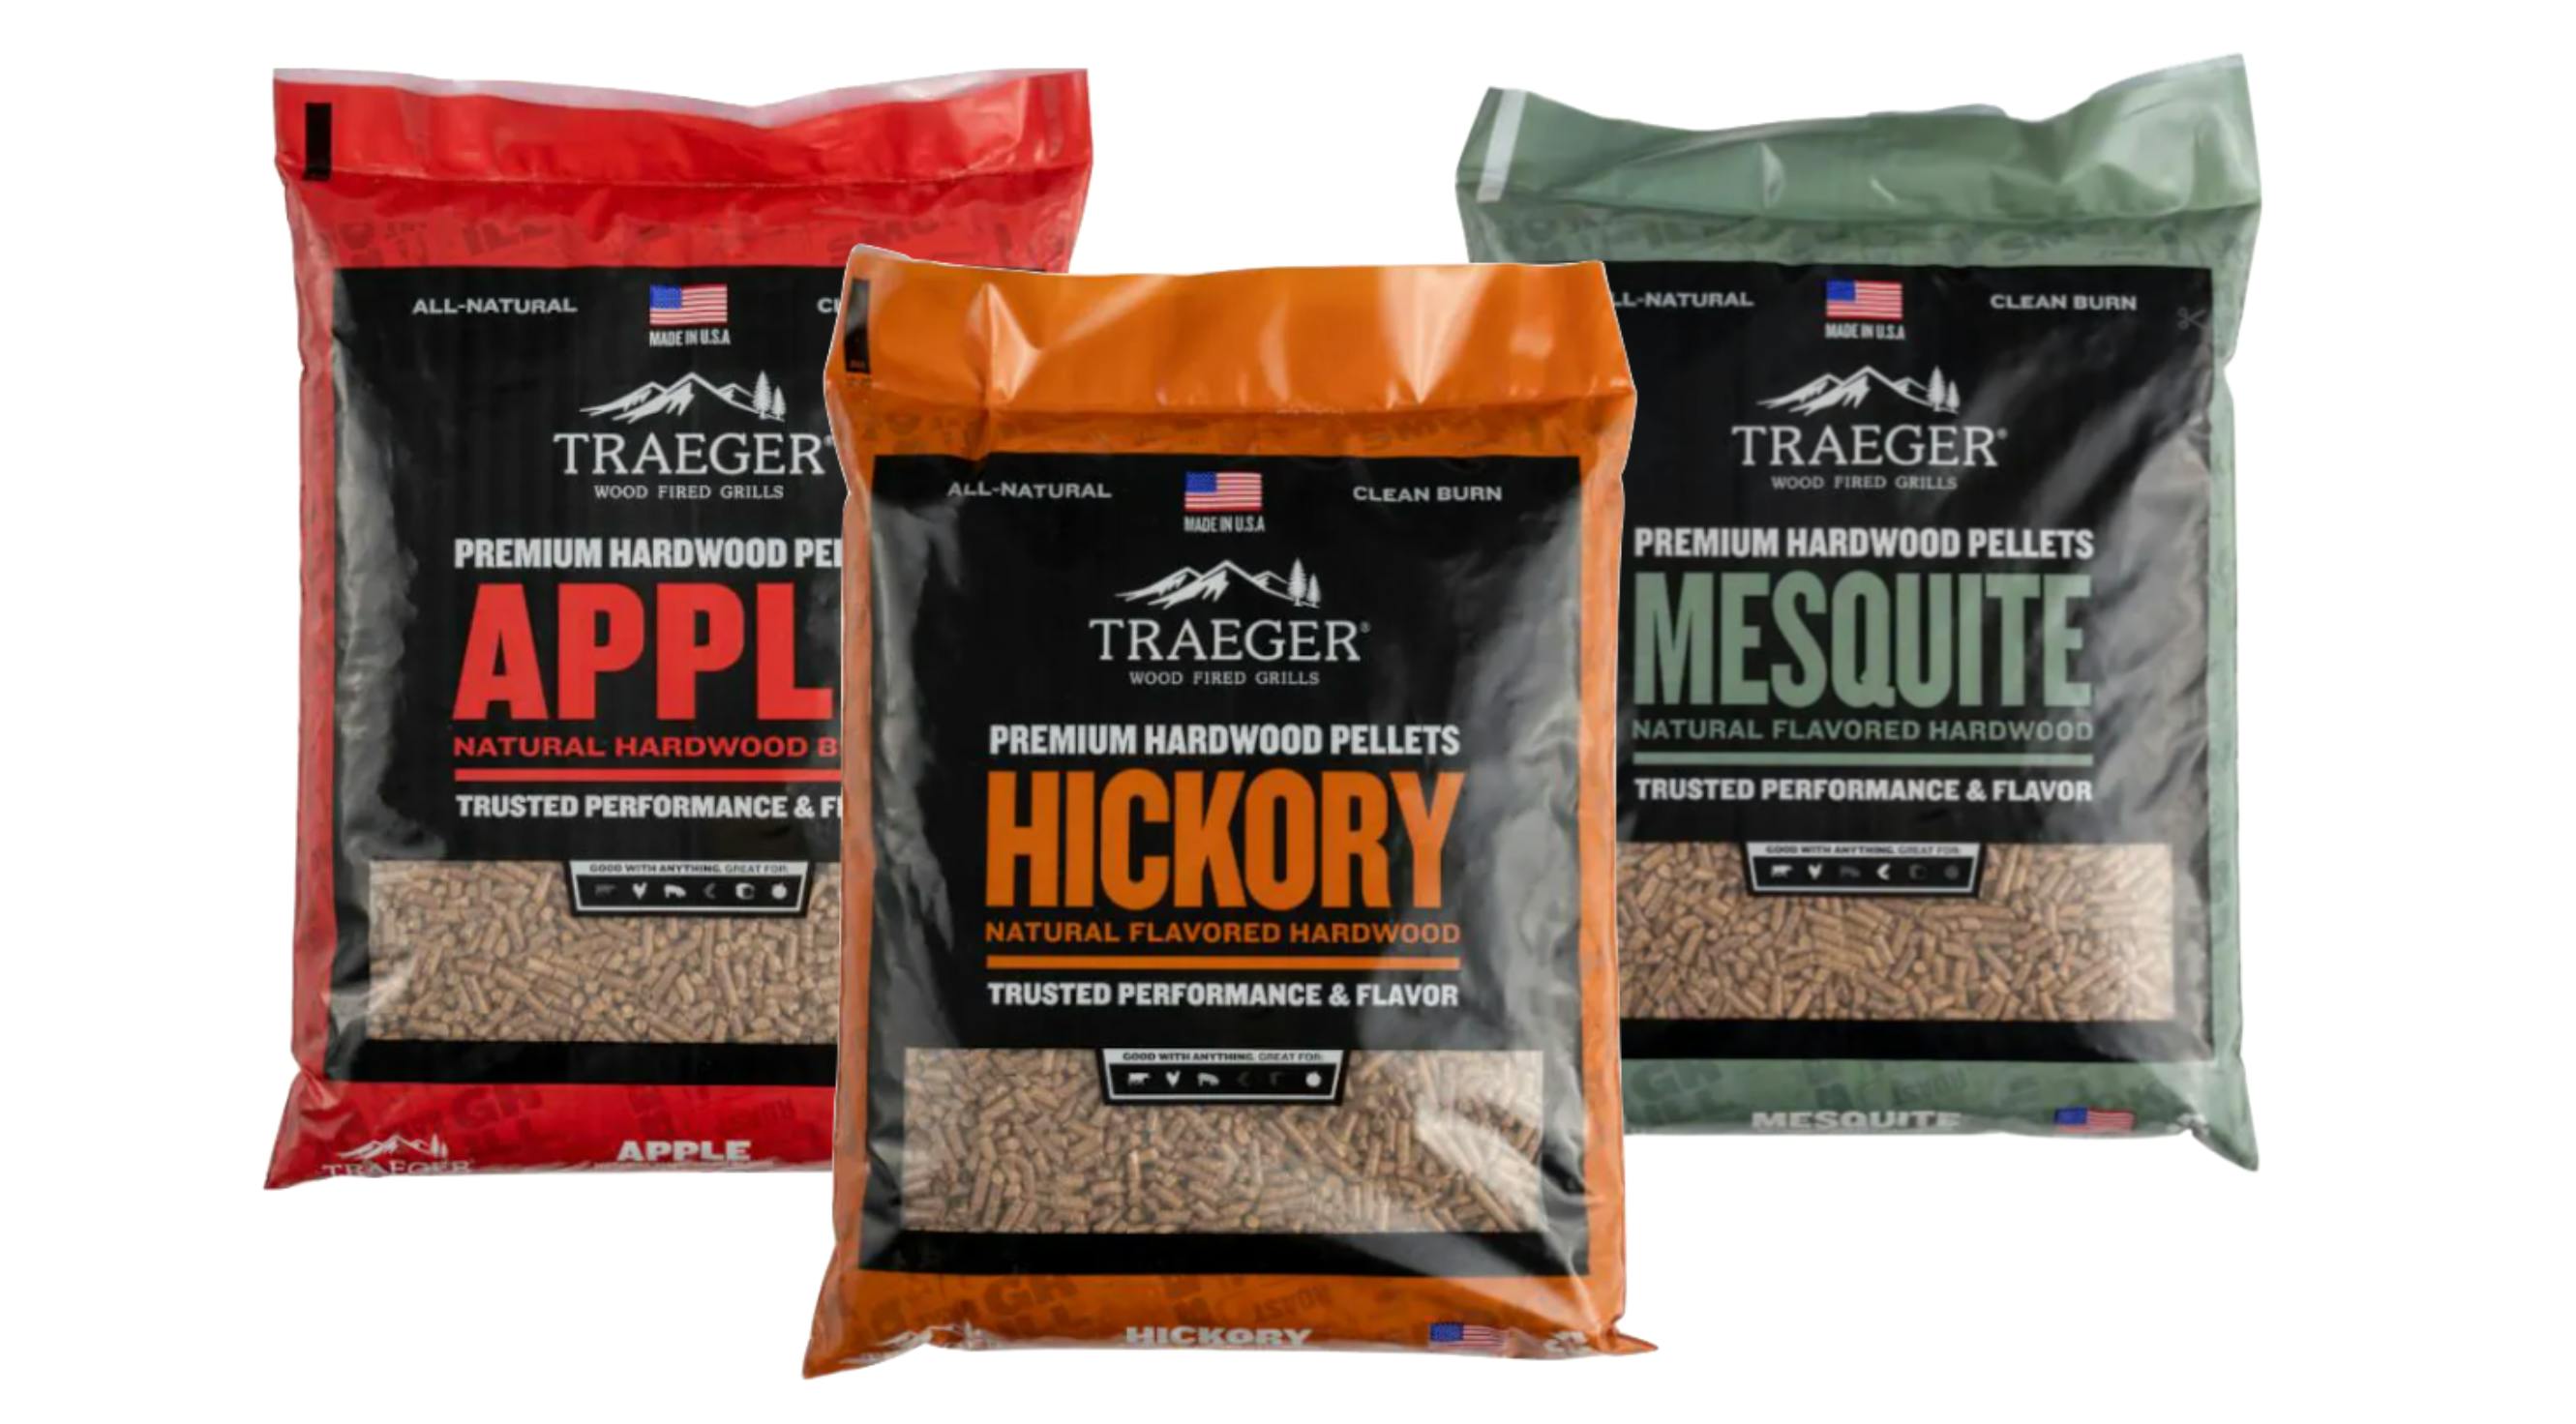 Product image of the Traeger Pellet Variety Gift Set.